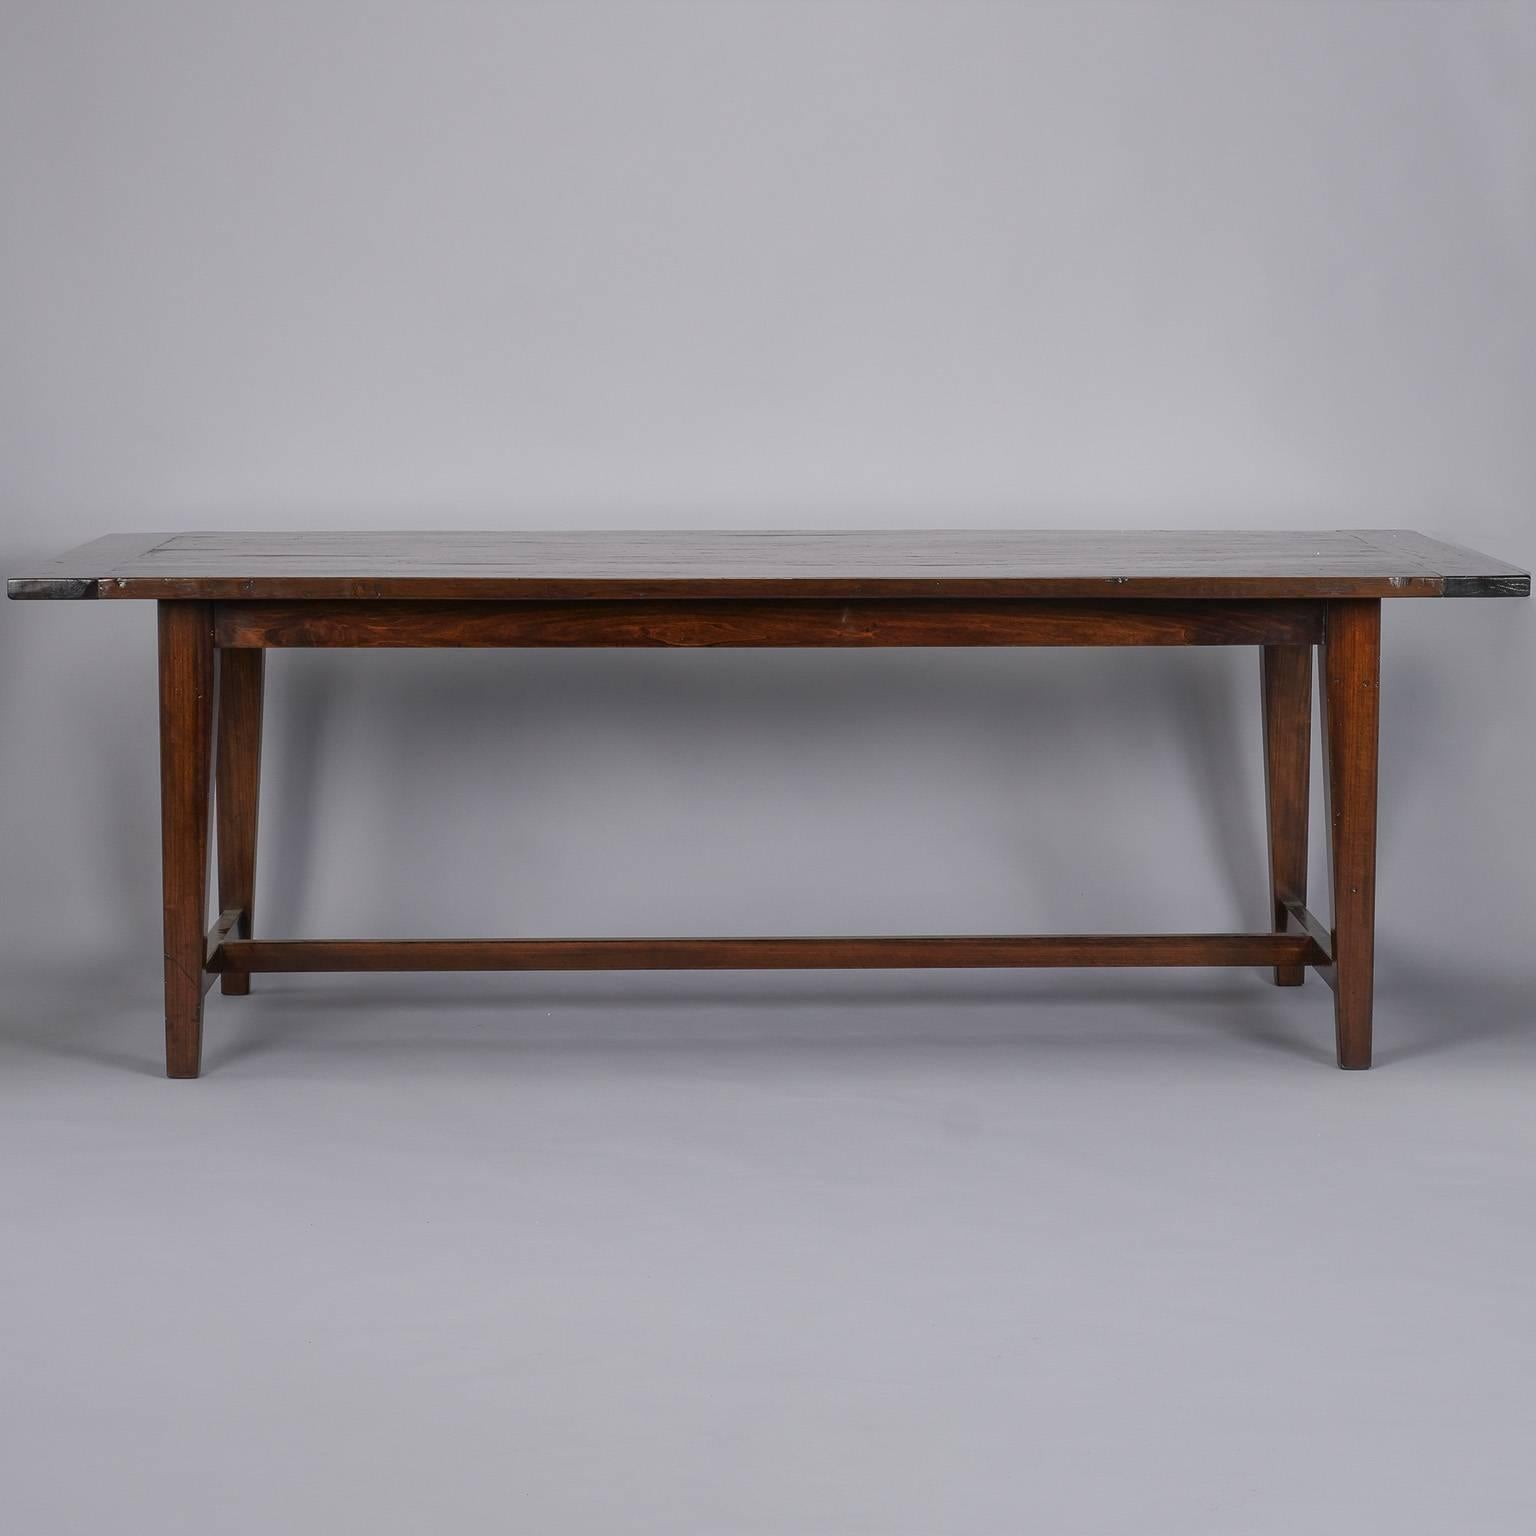 French chestnut tabletop on new legs, circa 1860s. Beautiful wear and patina to the solid chestnut farm tabletop which is supported by new, solid wood legs with a subtle taper, centre and side stretchers.  Table apron height = 25.5